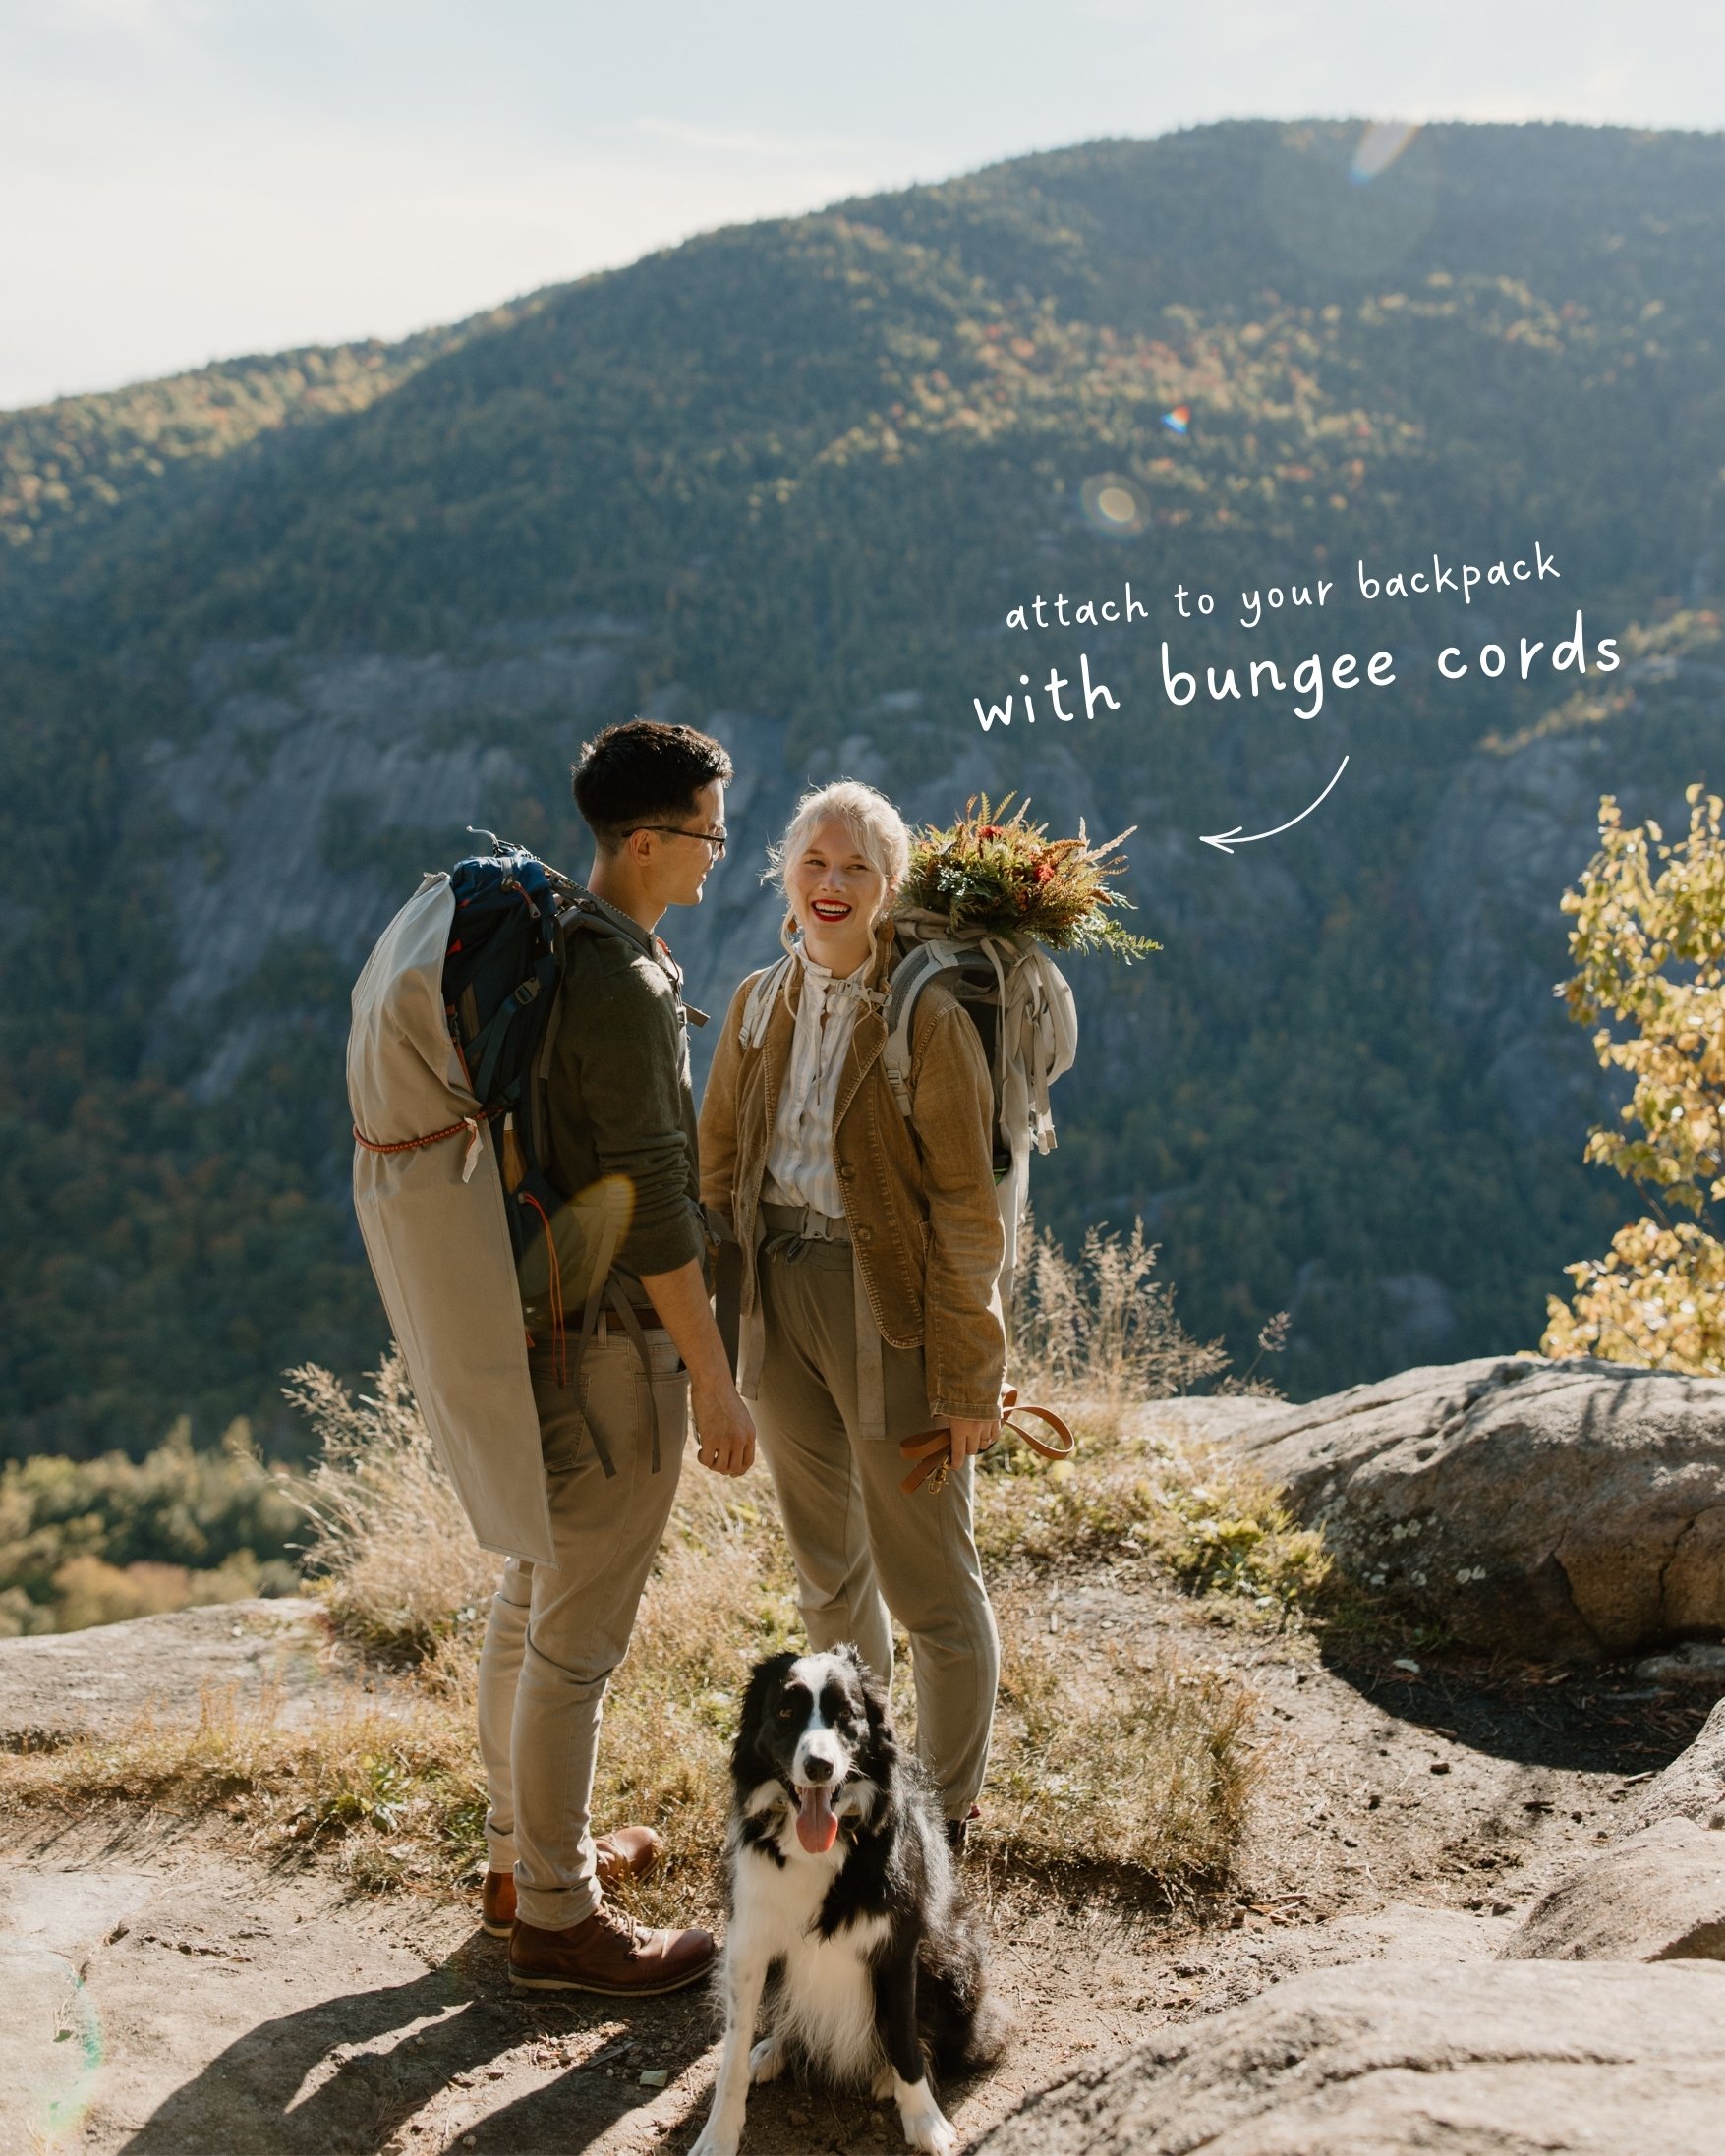 how-to-hike-with-wedding-dress-elopement-3.jpg